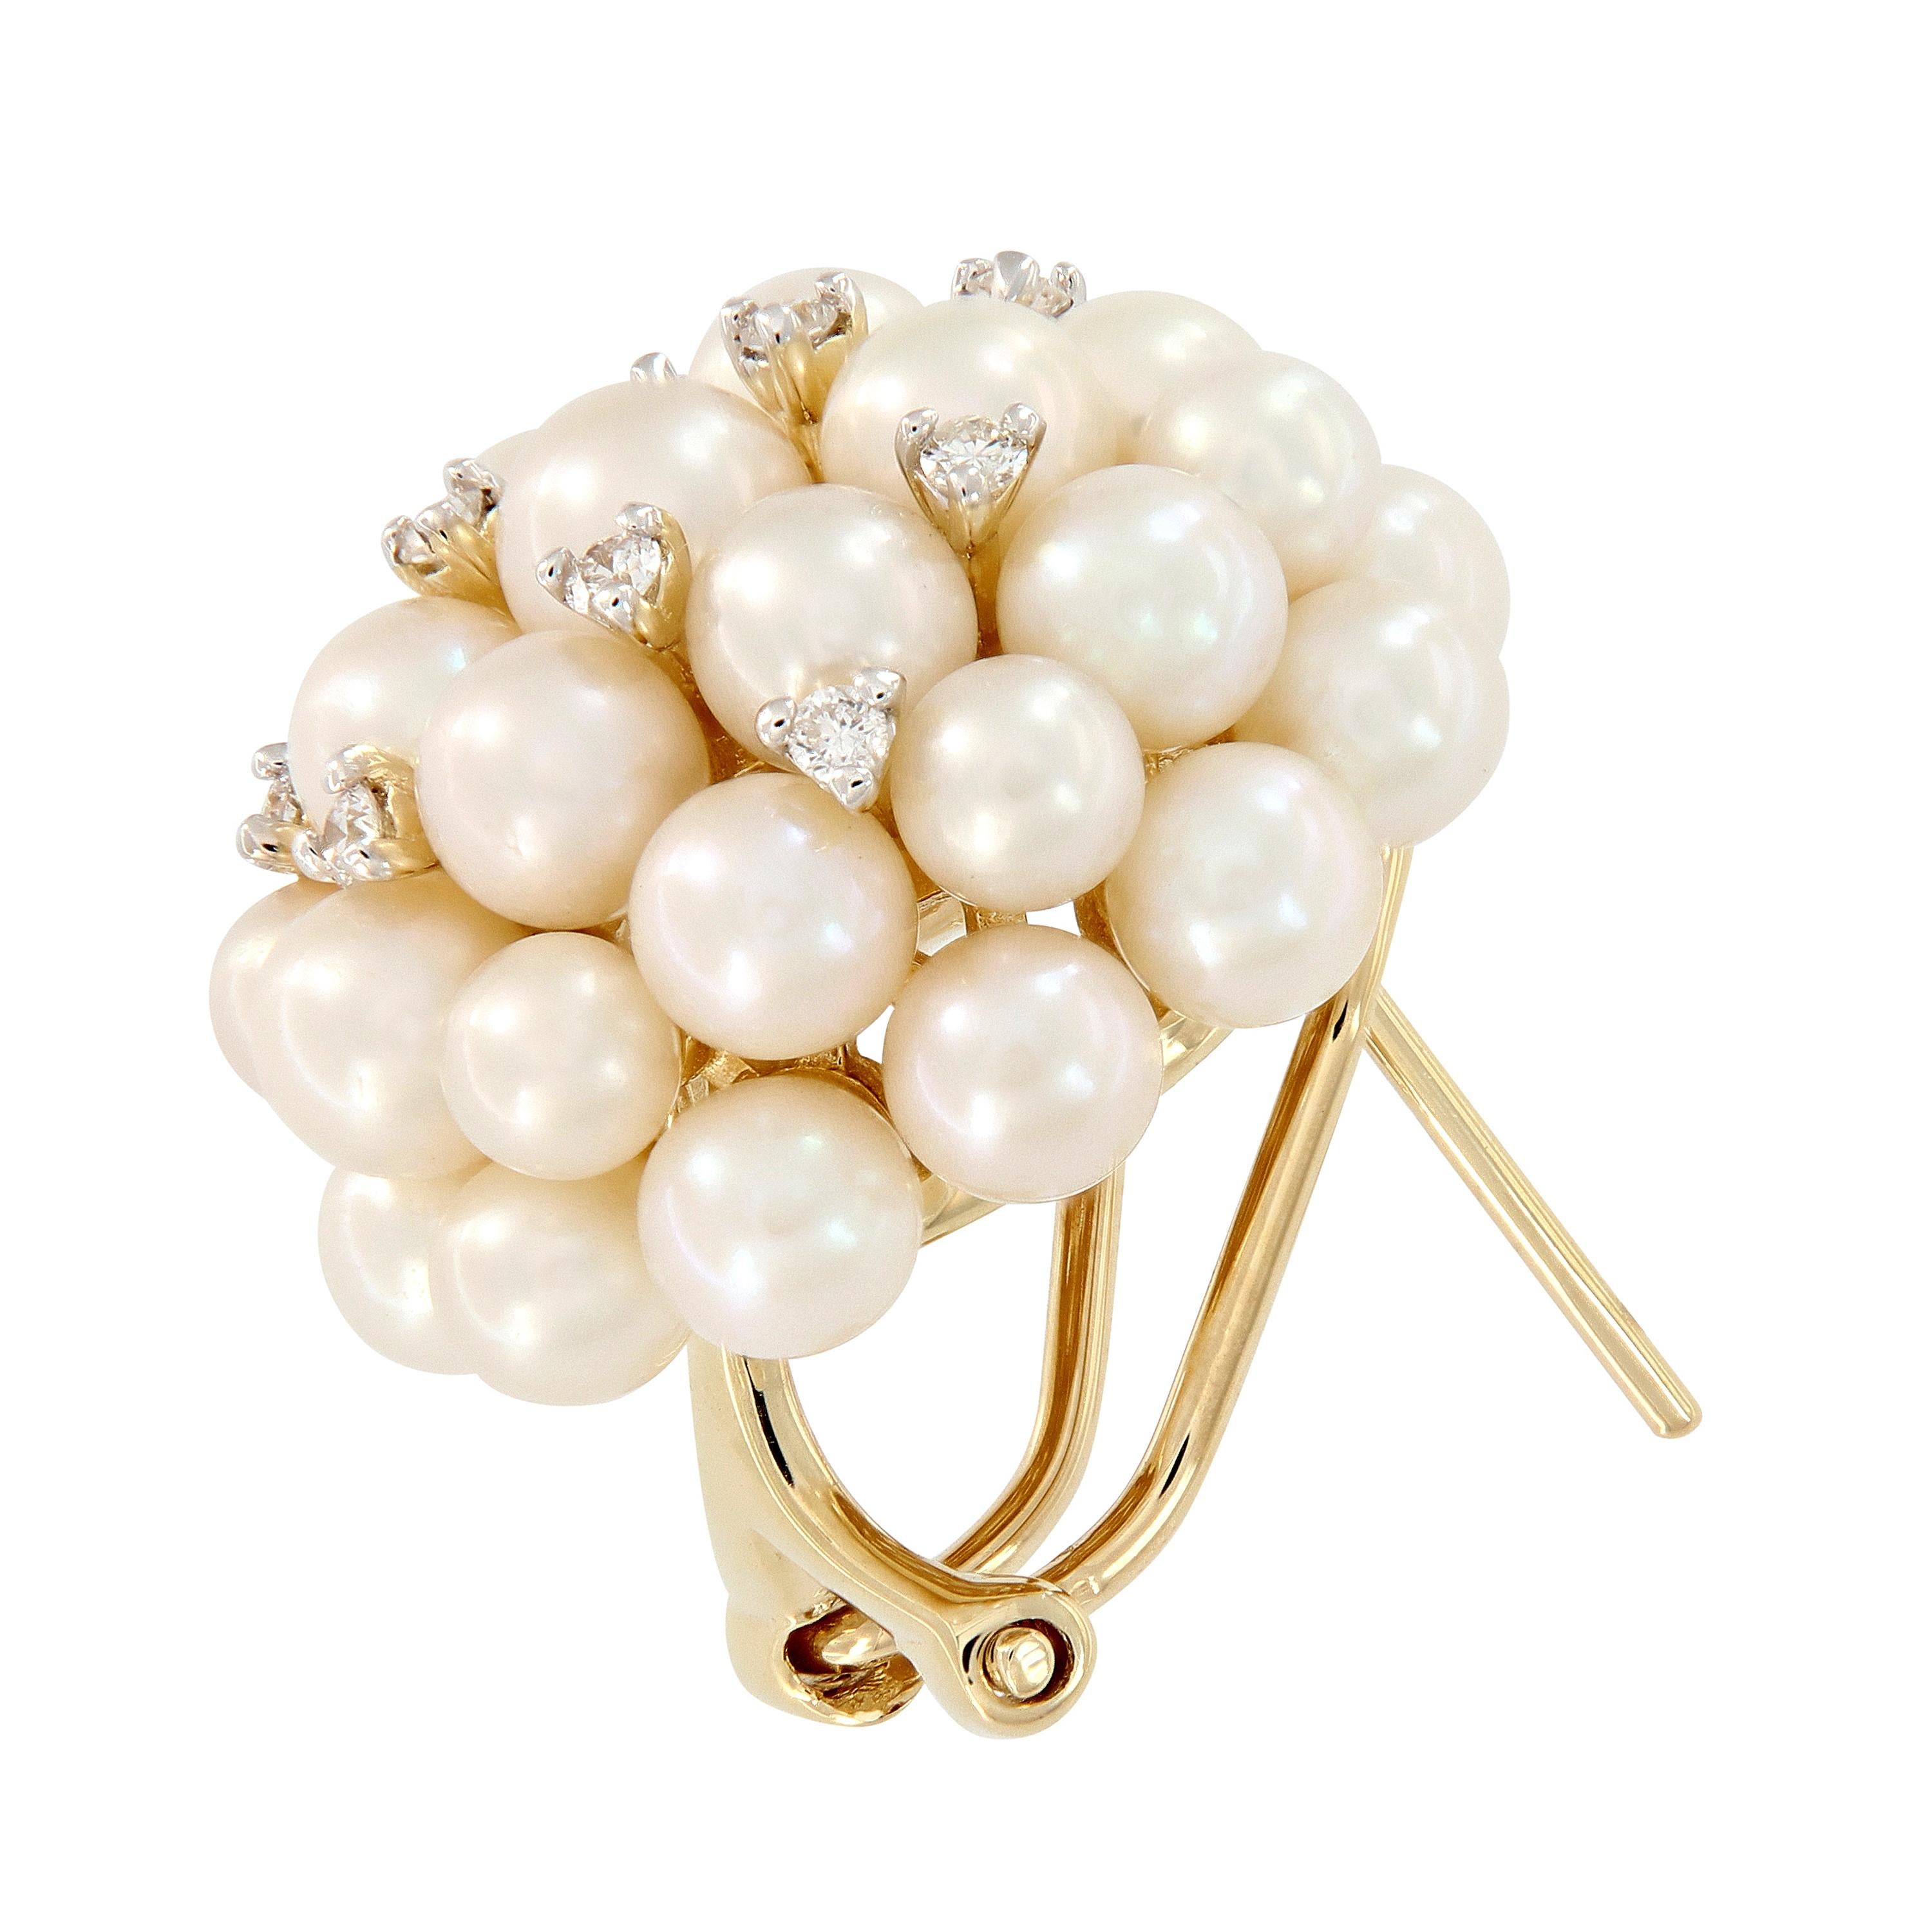 Retro-inspired in design, but timeless in wear. The pearls and diamonds are artfully arranged and are set in 14k yellow gold.

Diamonds 0.19 cttw